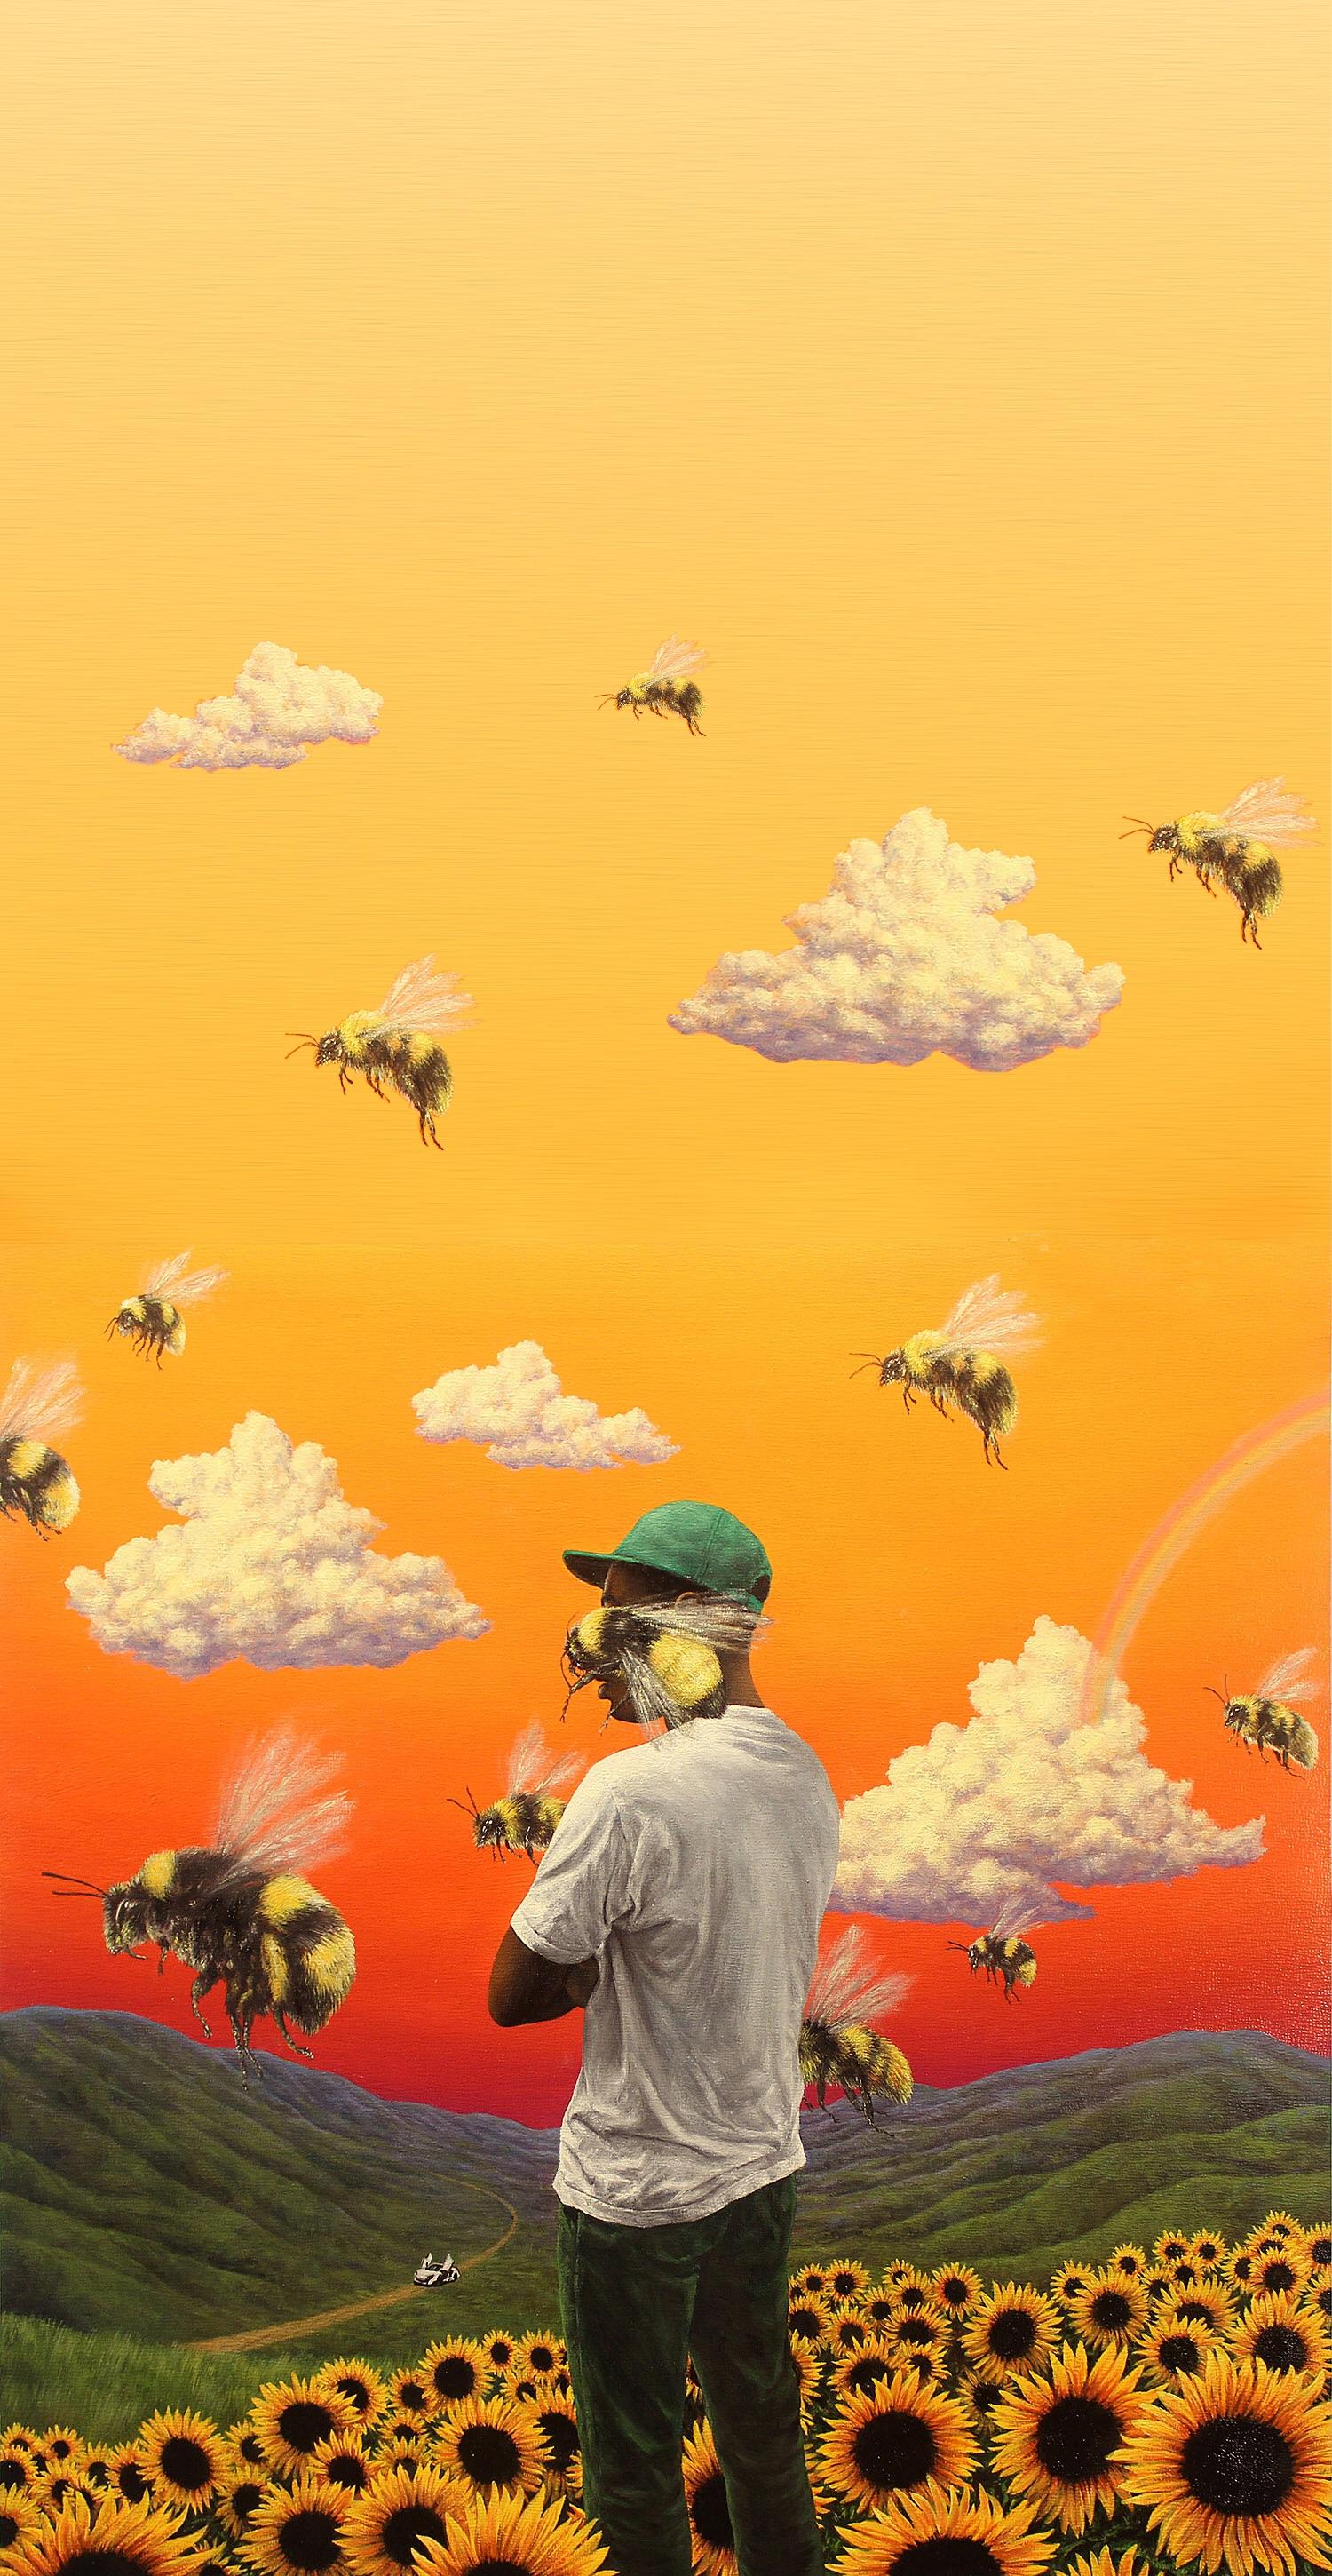 Couldn't Find A High Res Flower Boy Wallpaper So Here's An IPhone X One I Photohopped!